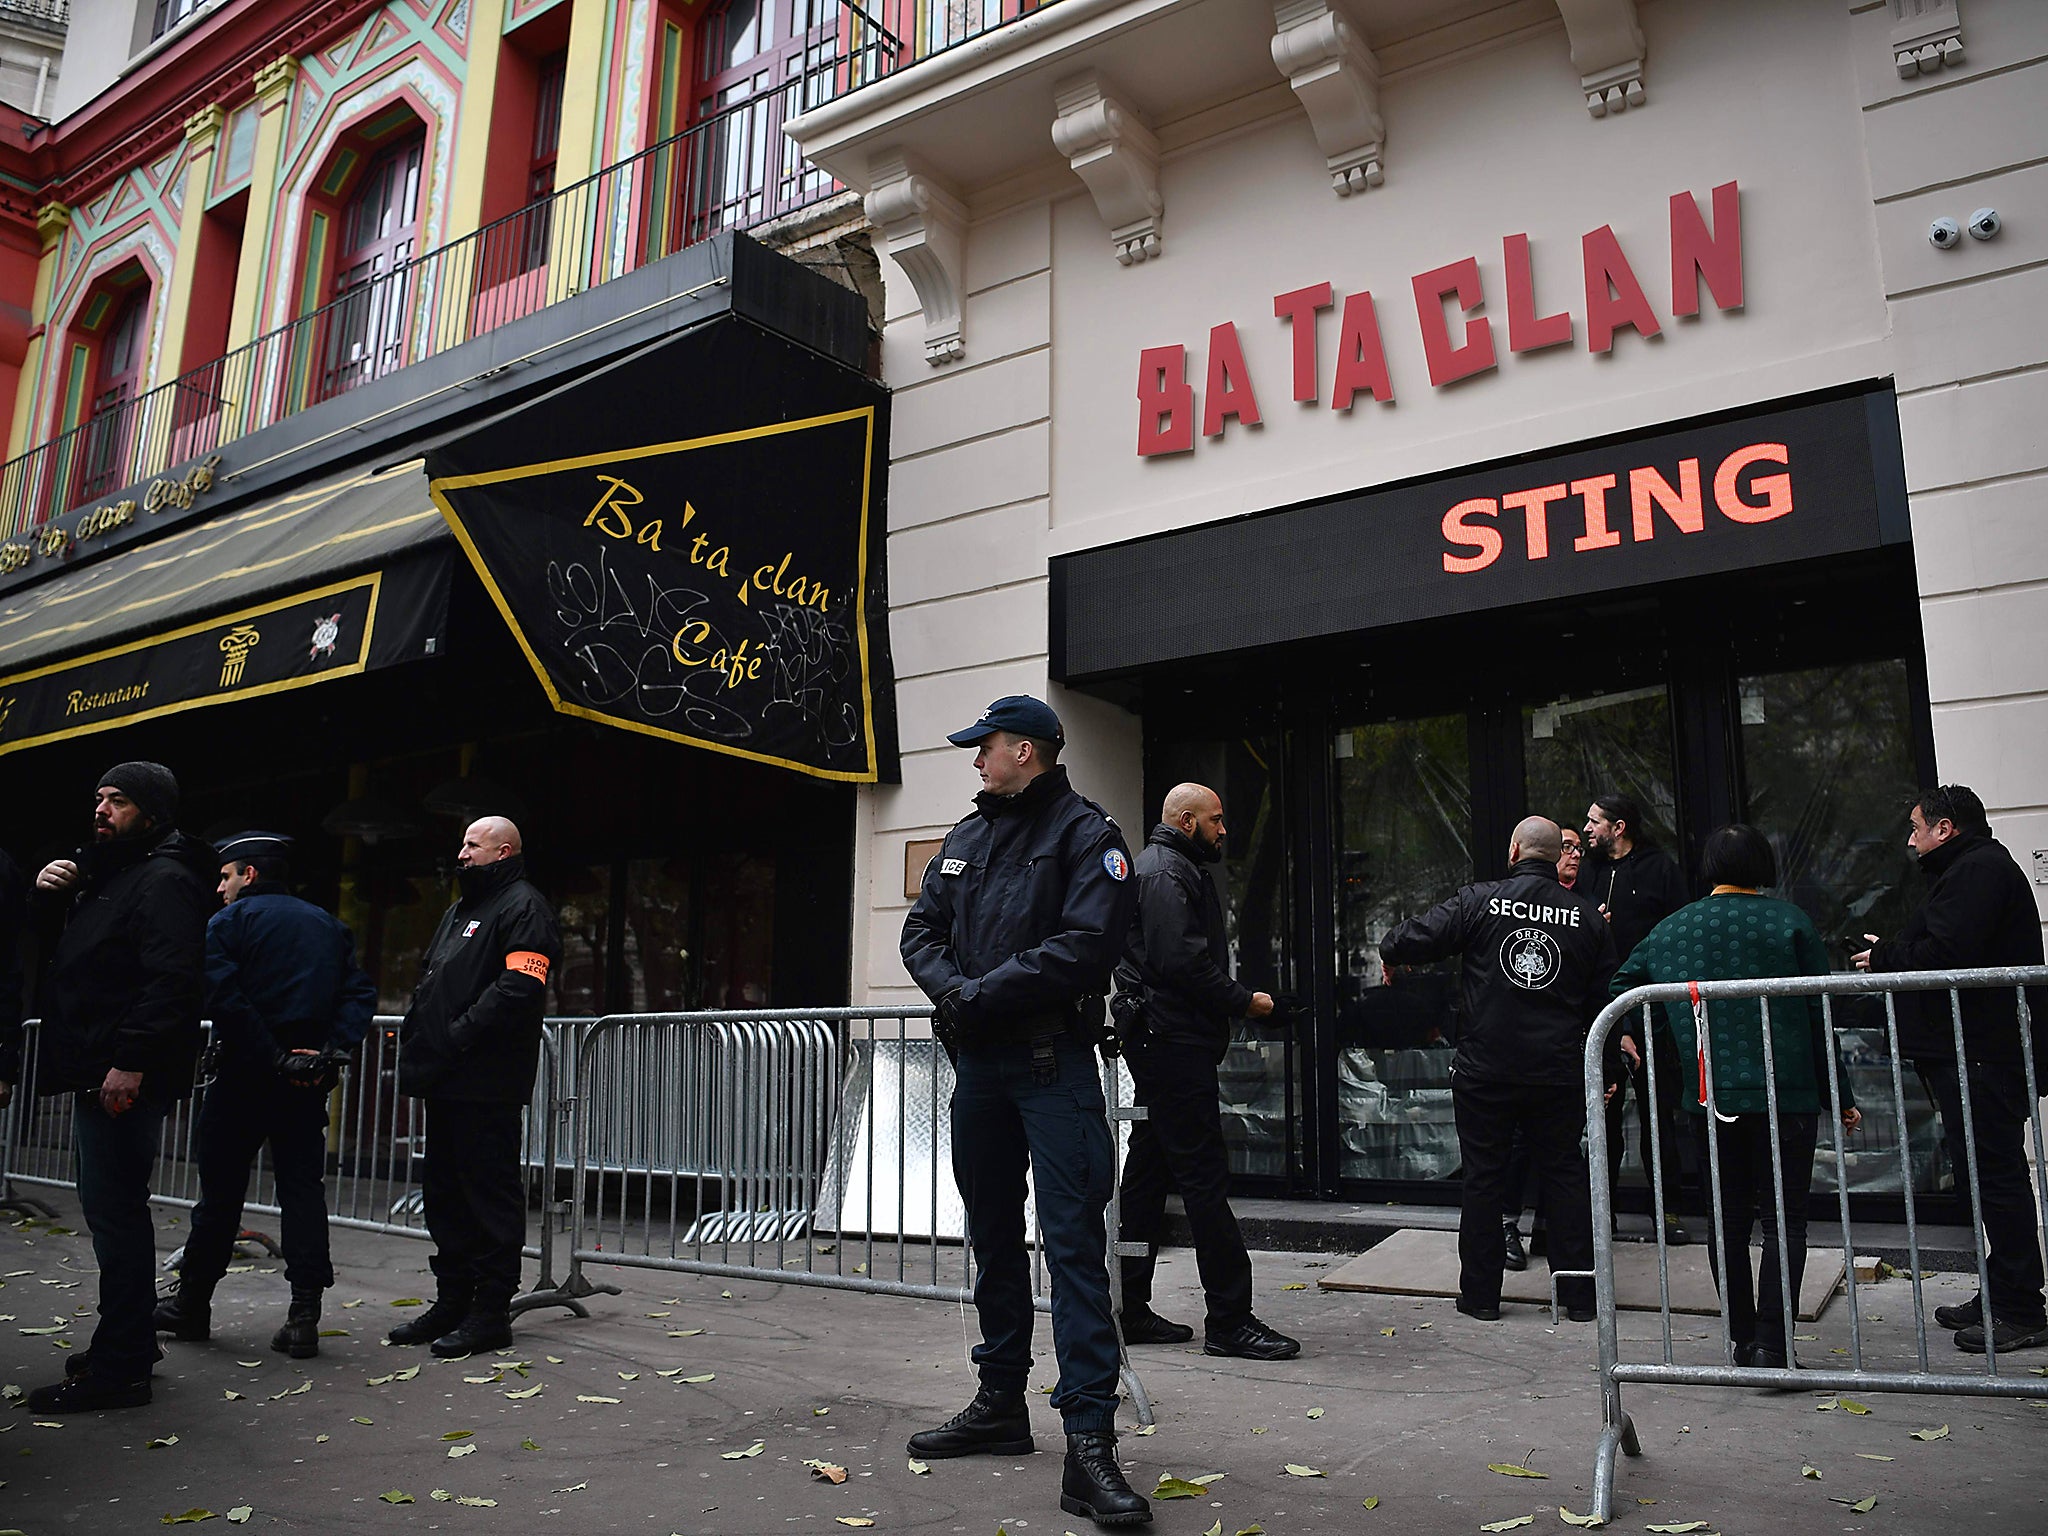 French policemen and security officers stand guard at the entrance of the Bataclan concert hall, a few hours before the reopening concert by British musician Sting to mark the first anniversary of the 13 November Paris attacks